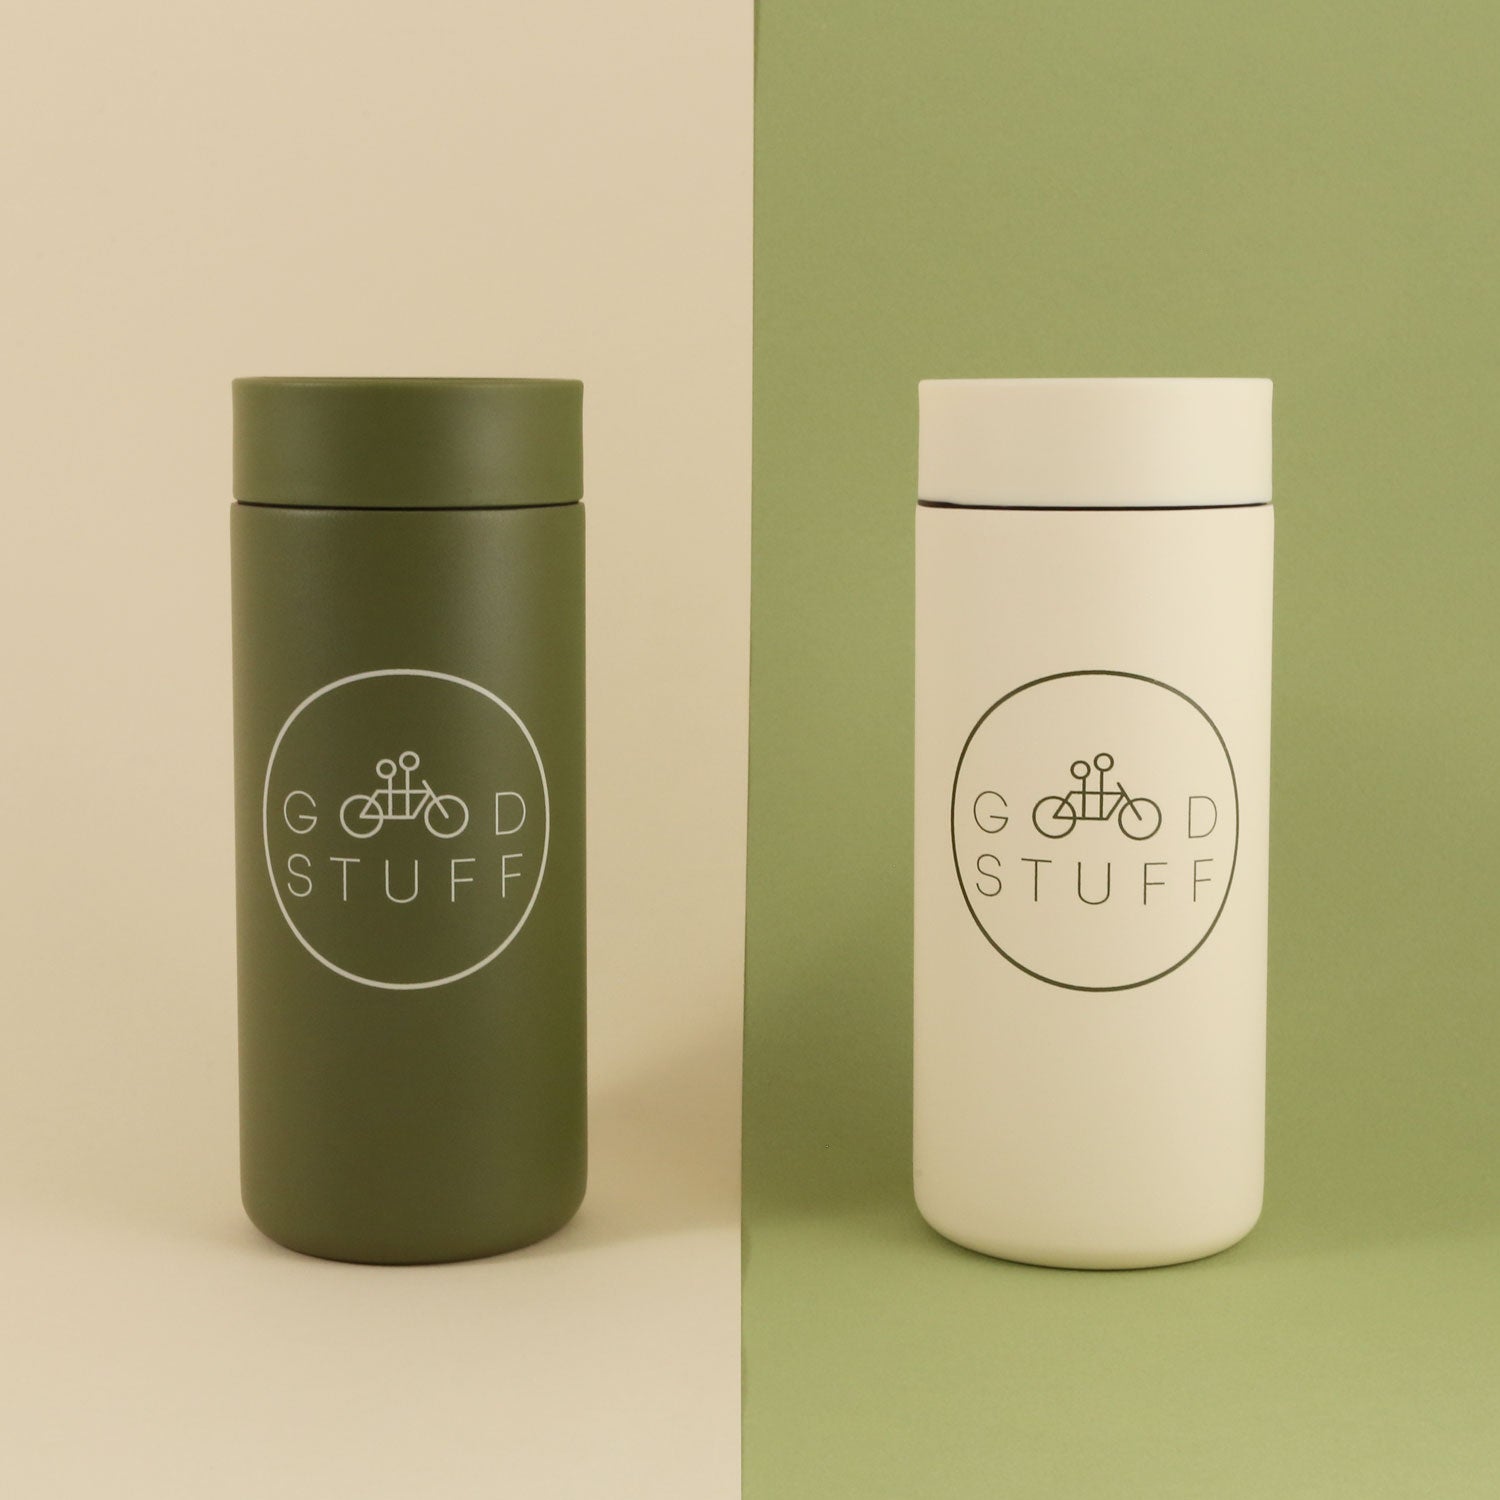 Two MiiR 360 Traveler "GOOD STUFF" mugs on a split background; one is dark green and the other white, both featuring the logo "good stuff" with a bicycle image. Created by Tandem Coffee Roasters.